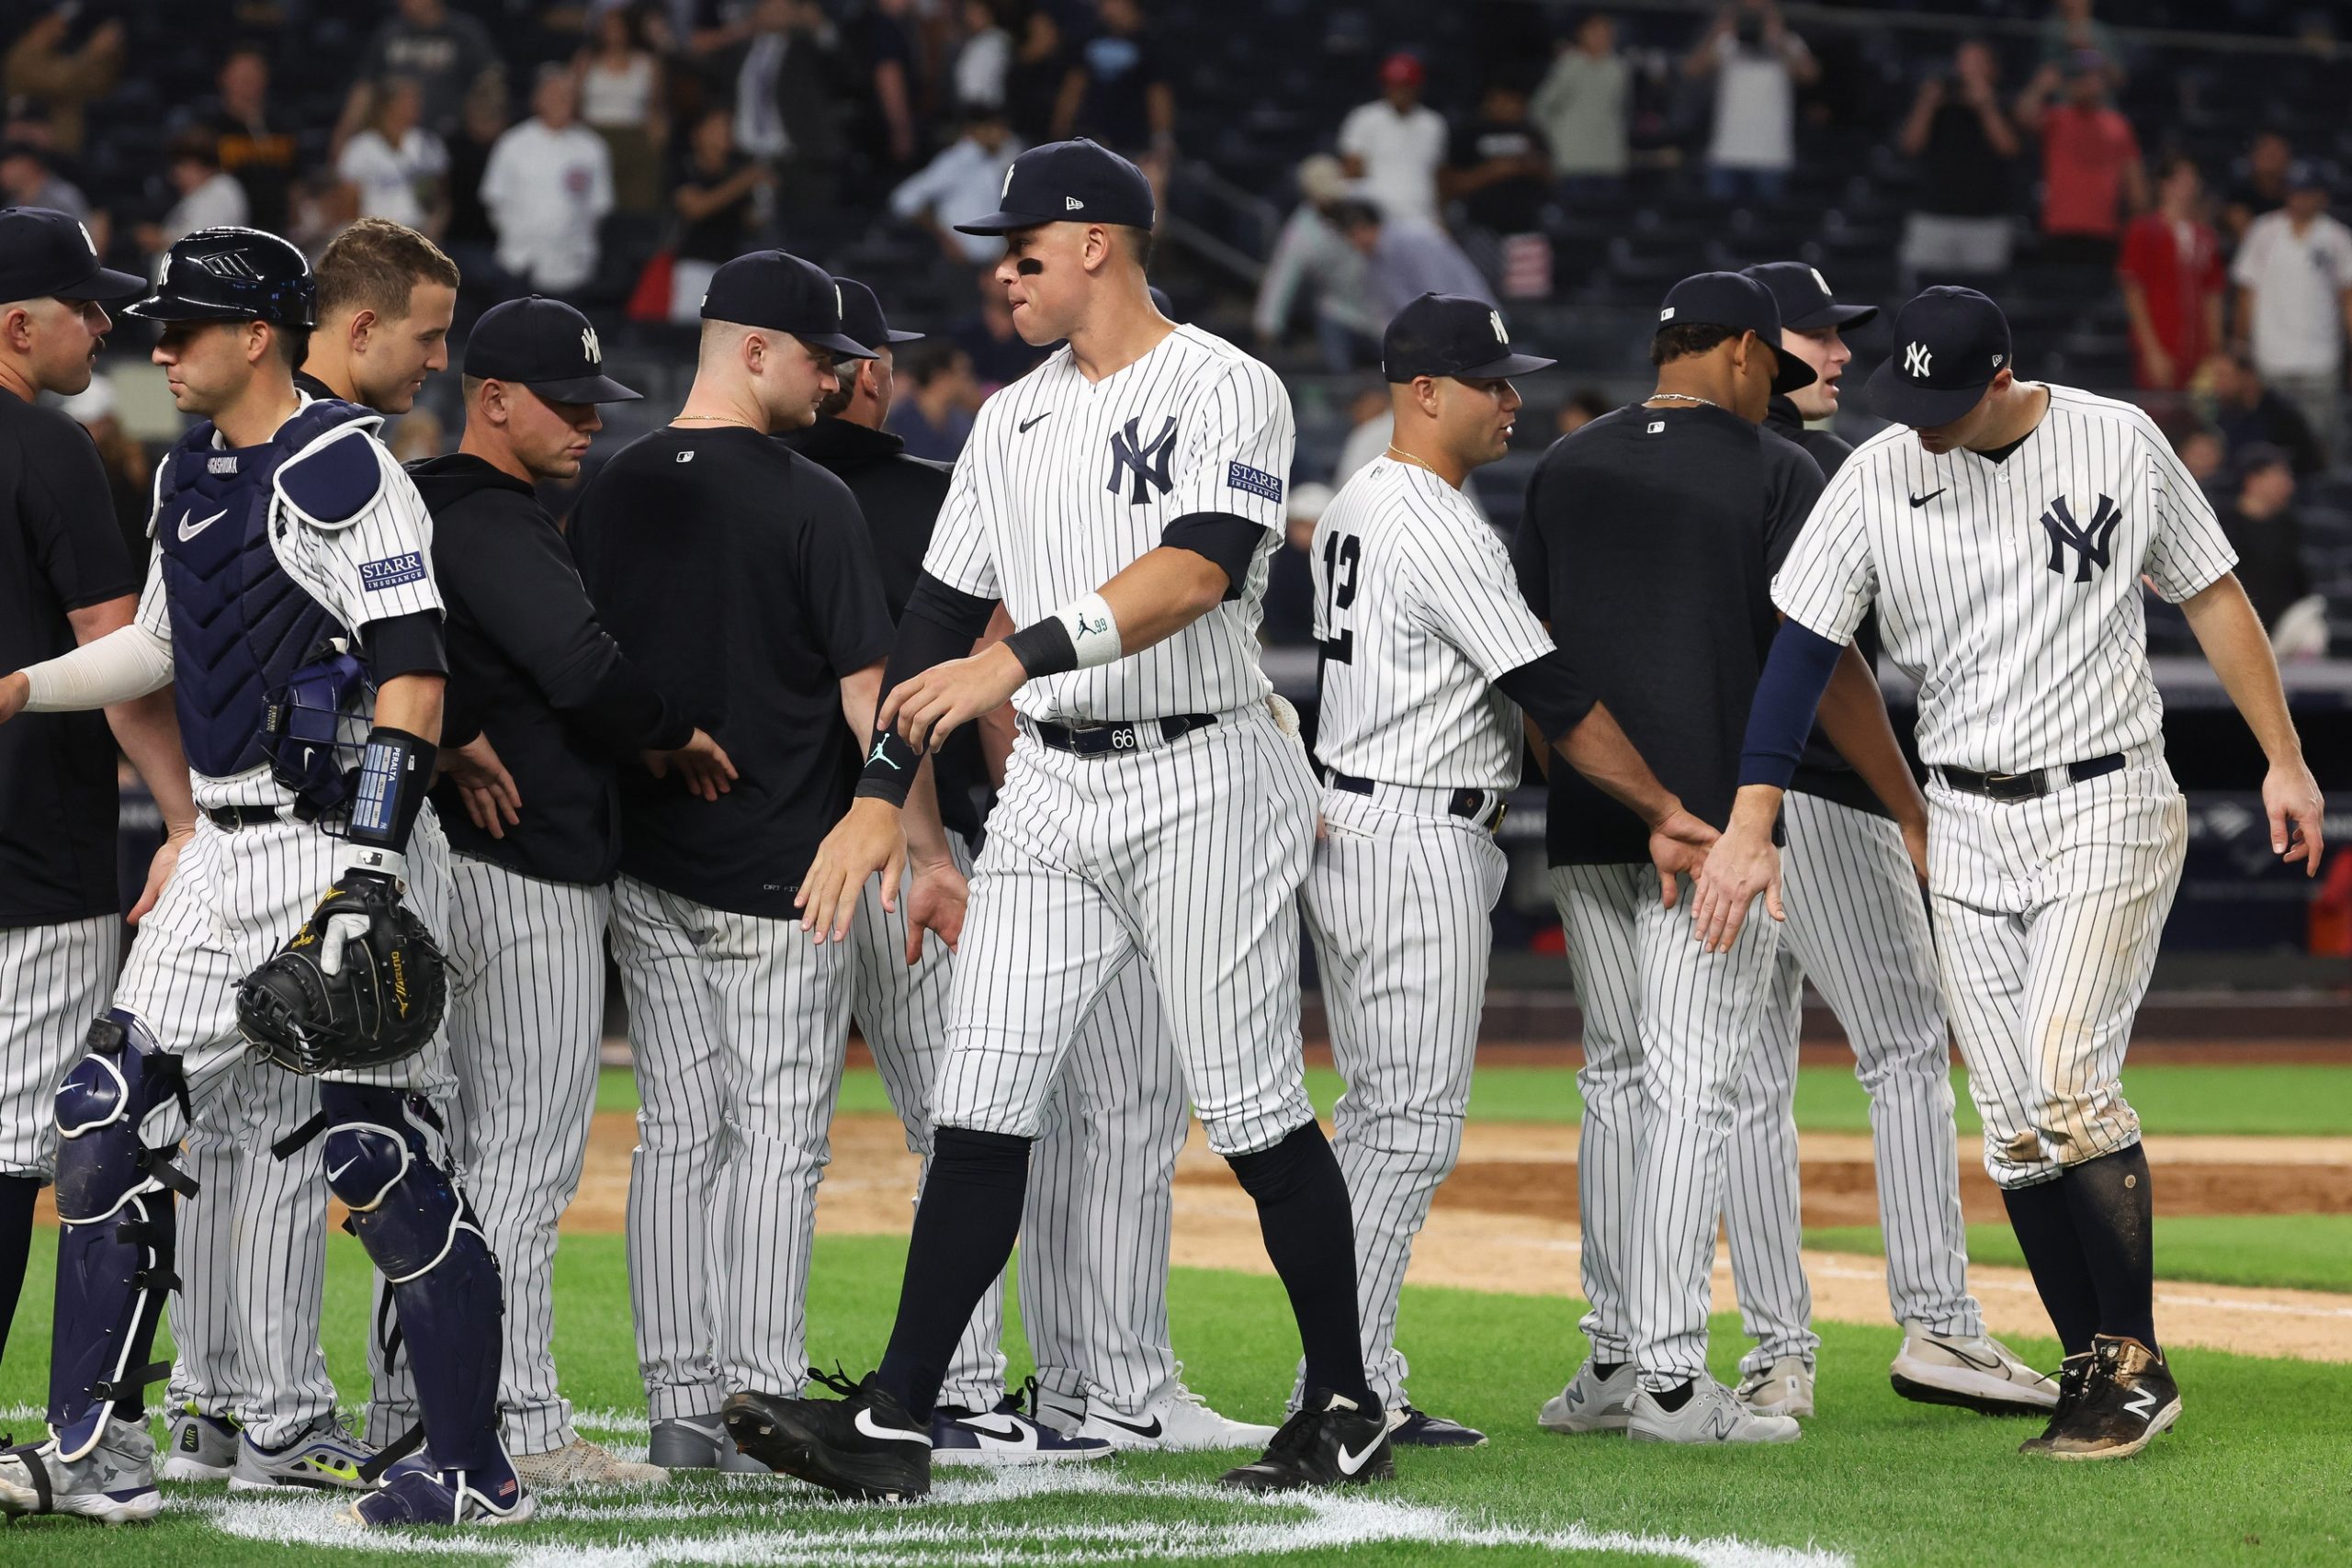 The Yankees are Truly a Poverty Franchise